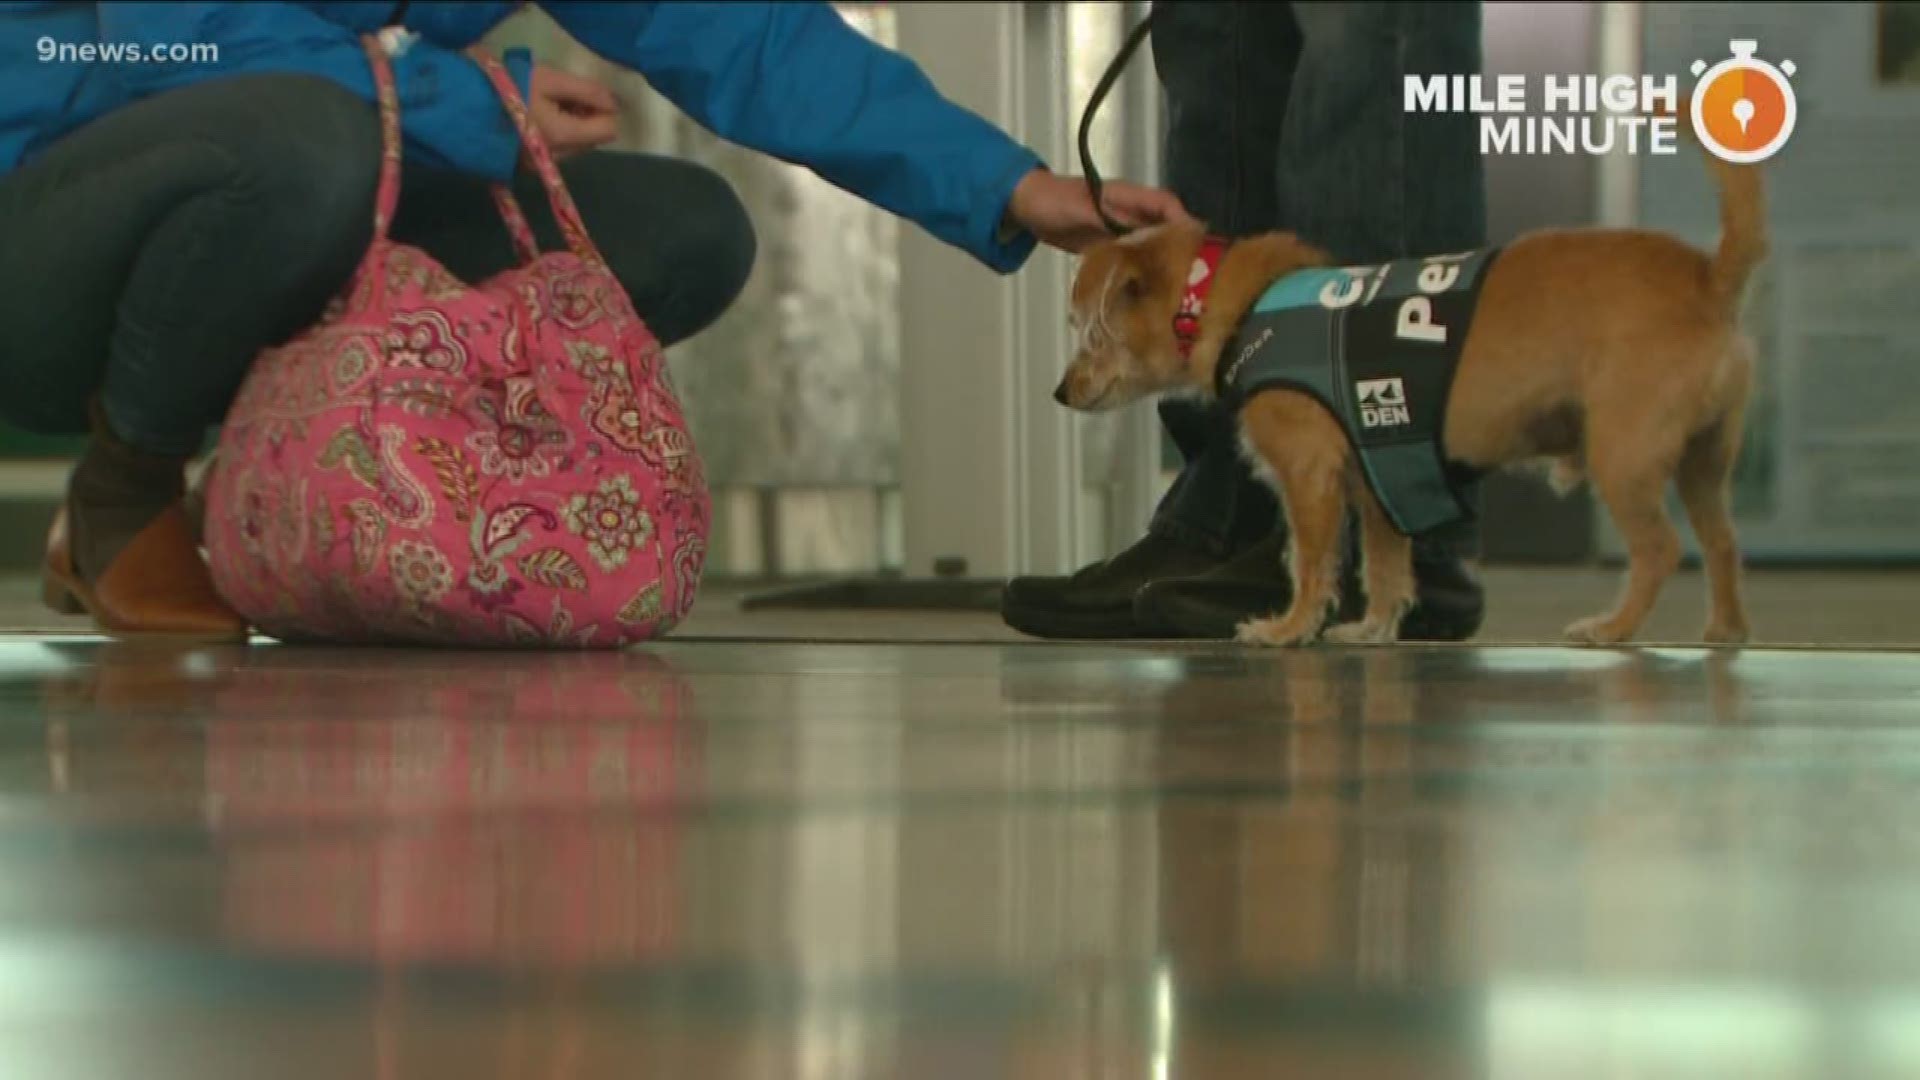 Volunteers and their animals roam around DIA through the Canine Airport Therapy Squad (CATS) with the goal of bringing smiles to passengers and staff.